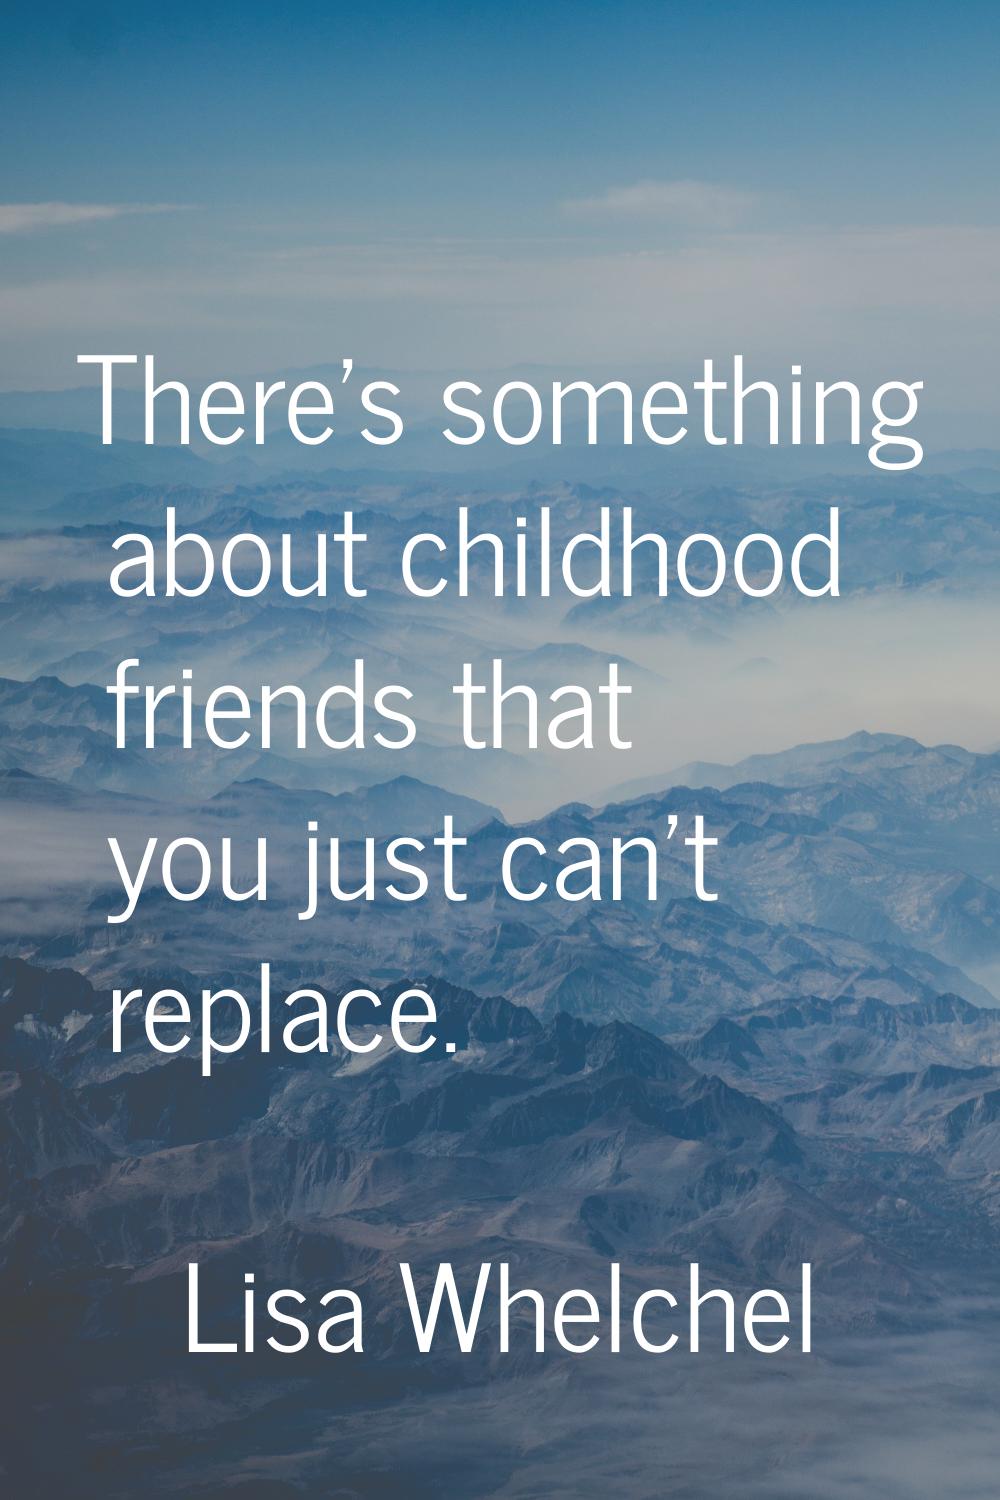 There's something about childhood friends that you just can't replace.